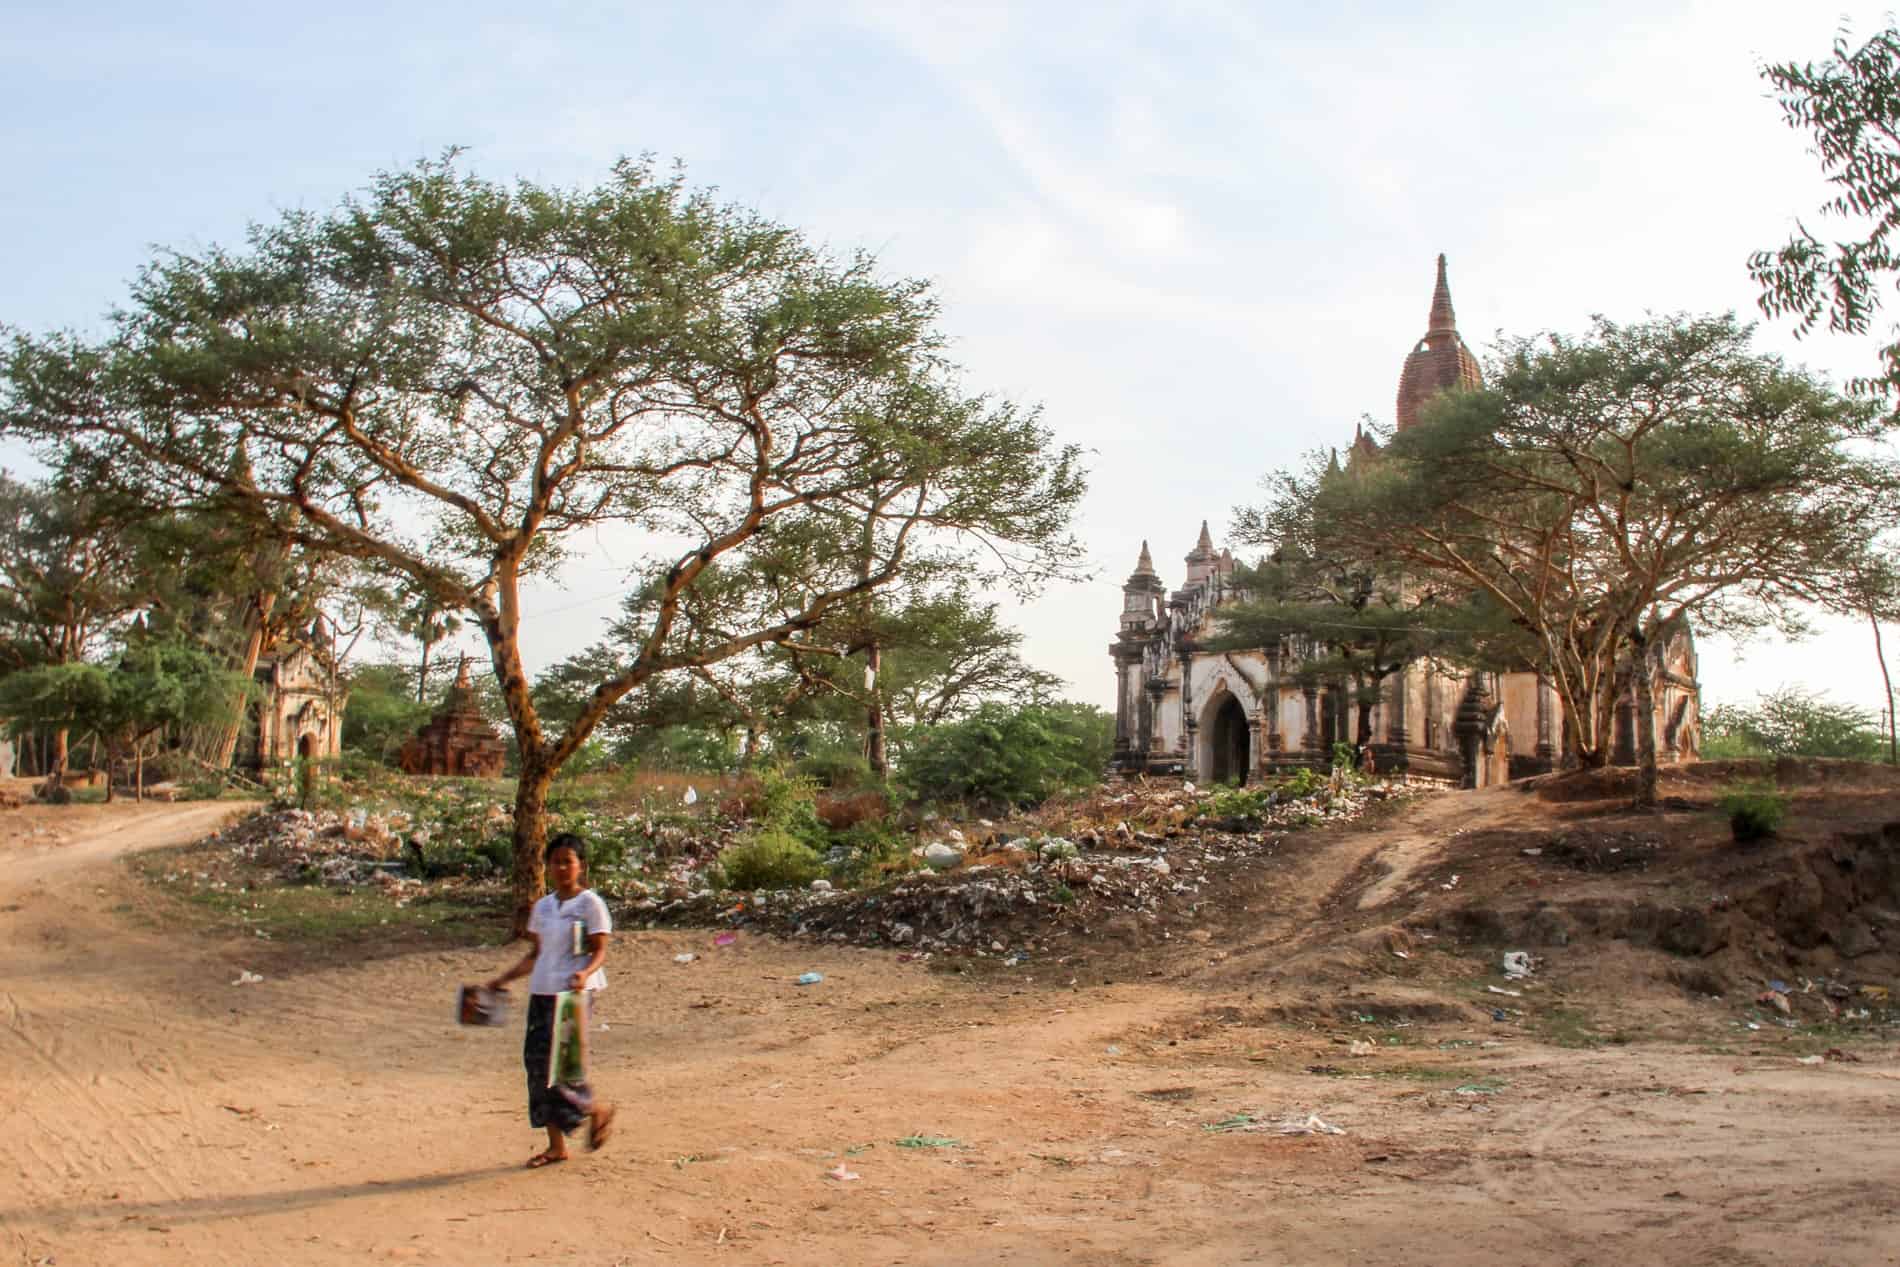 A Burmese woman on the dusty, arid roads of old Bagan outside a small off-white temple complex. 